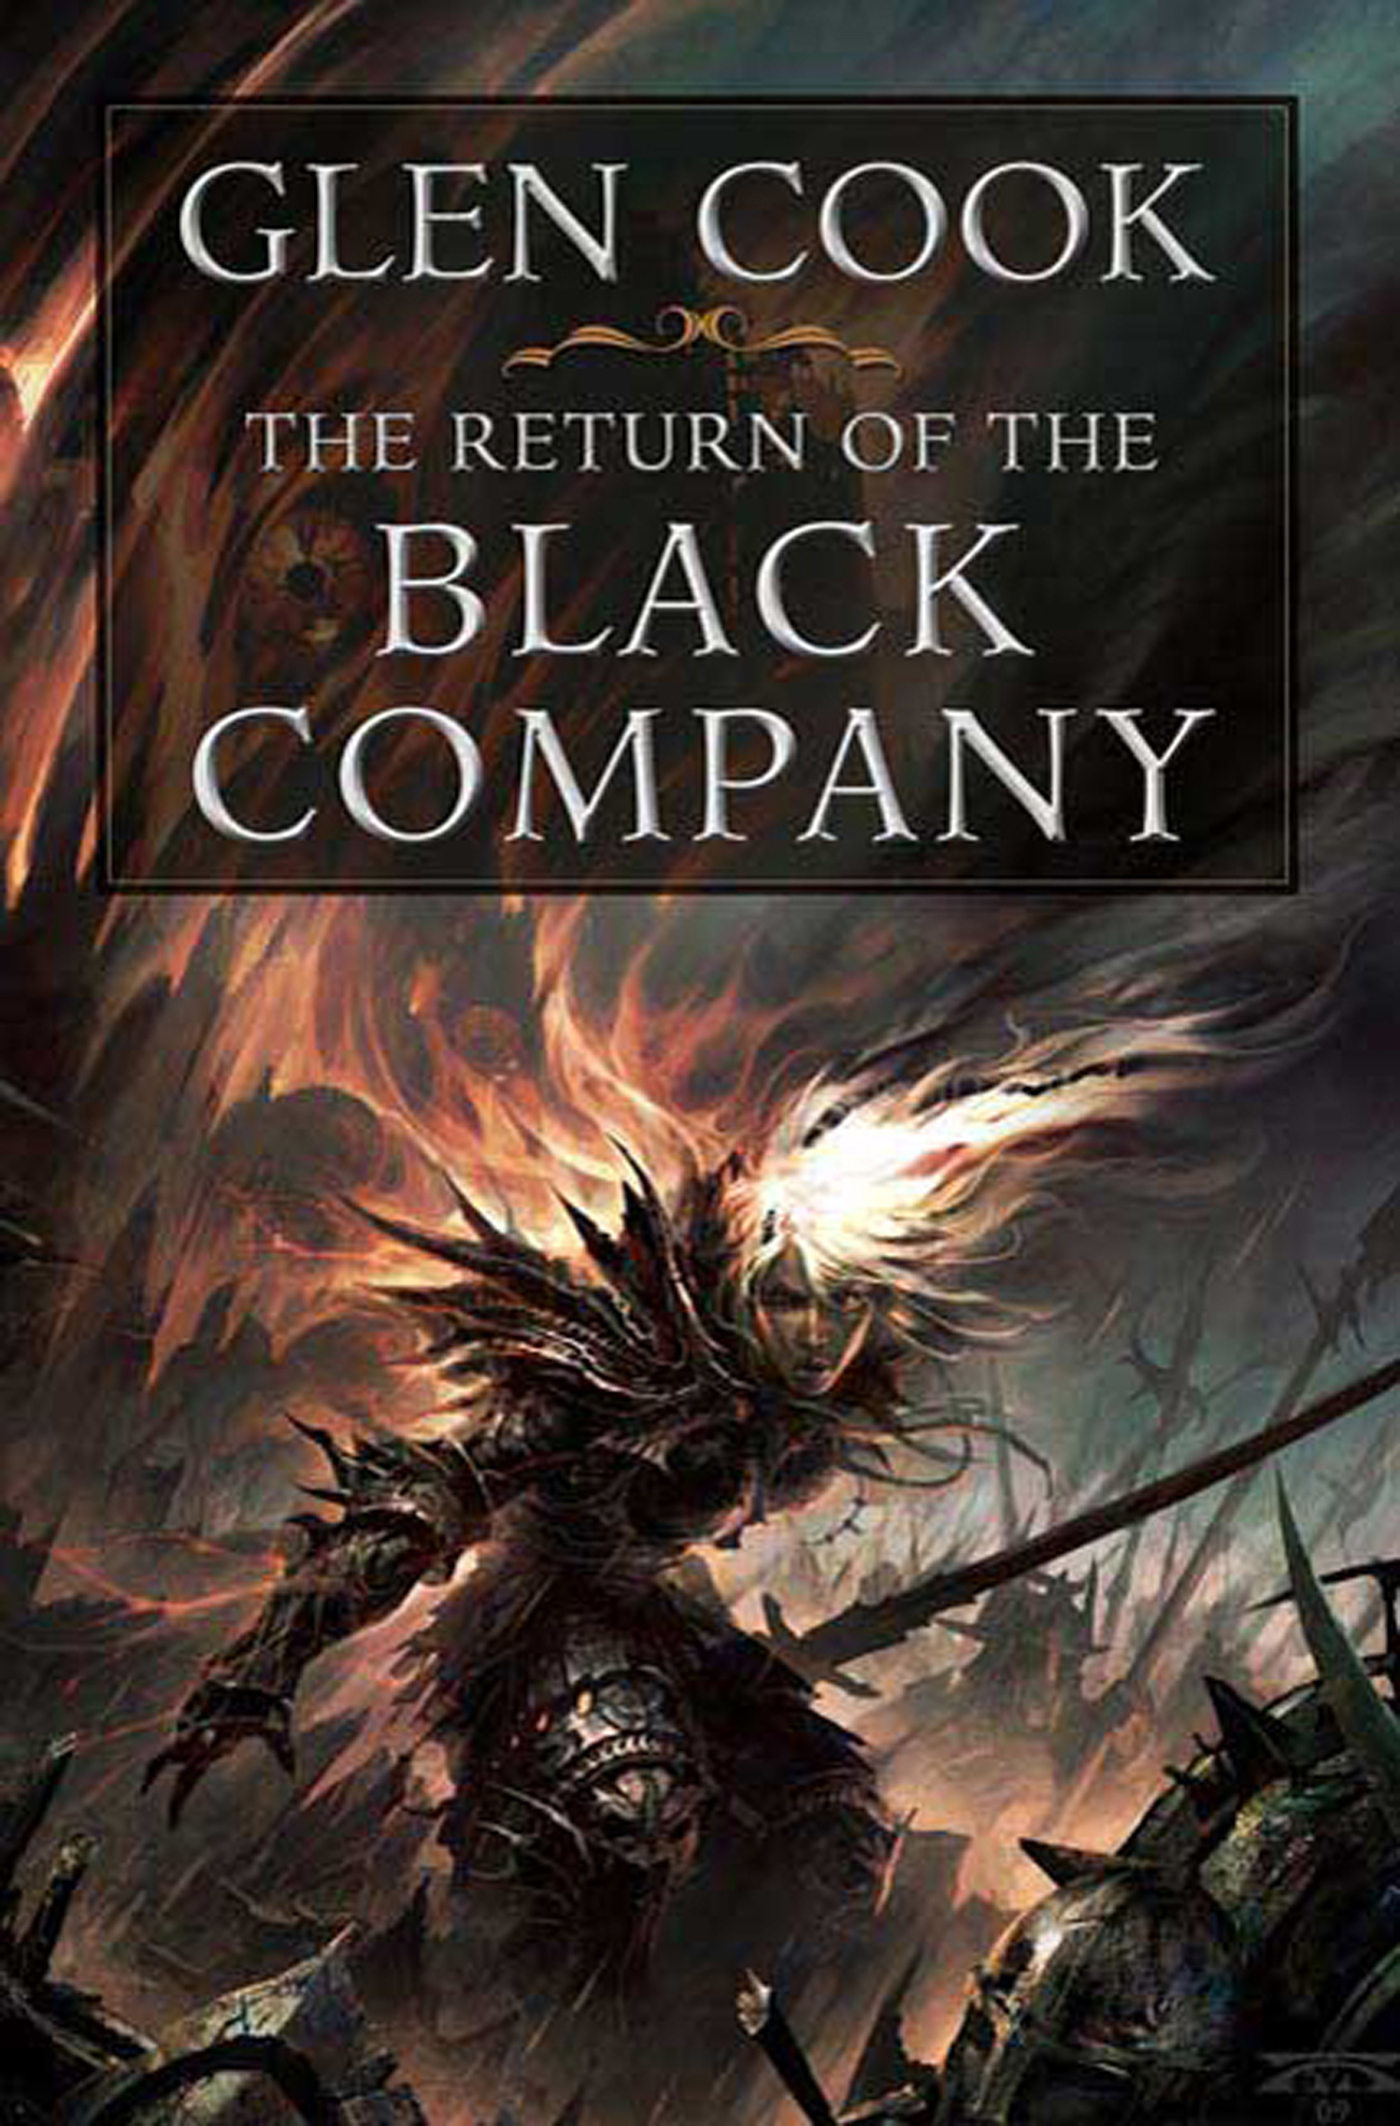 The Return of the Black Company by Glen Cook